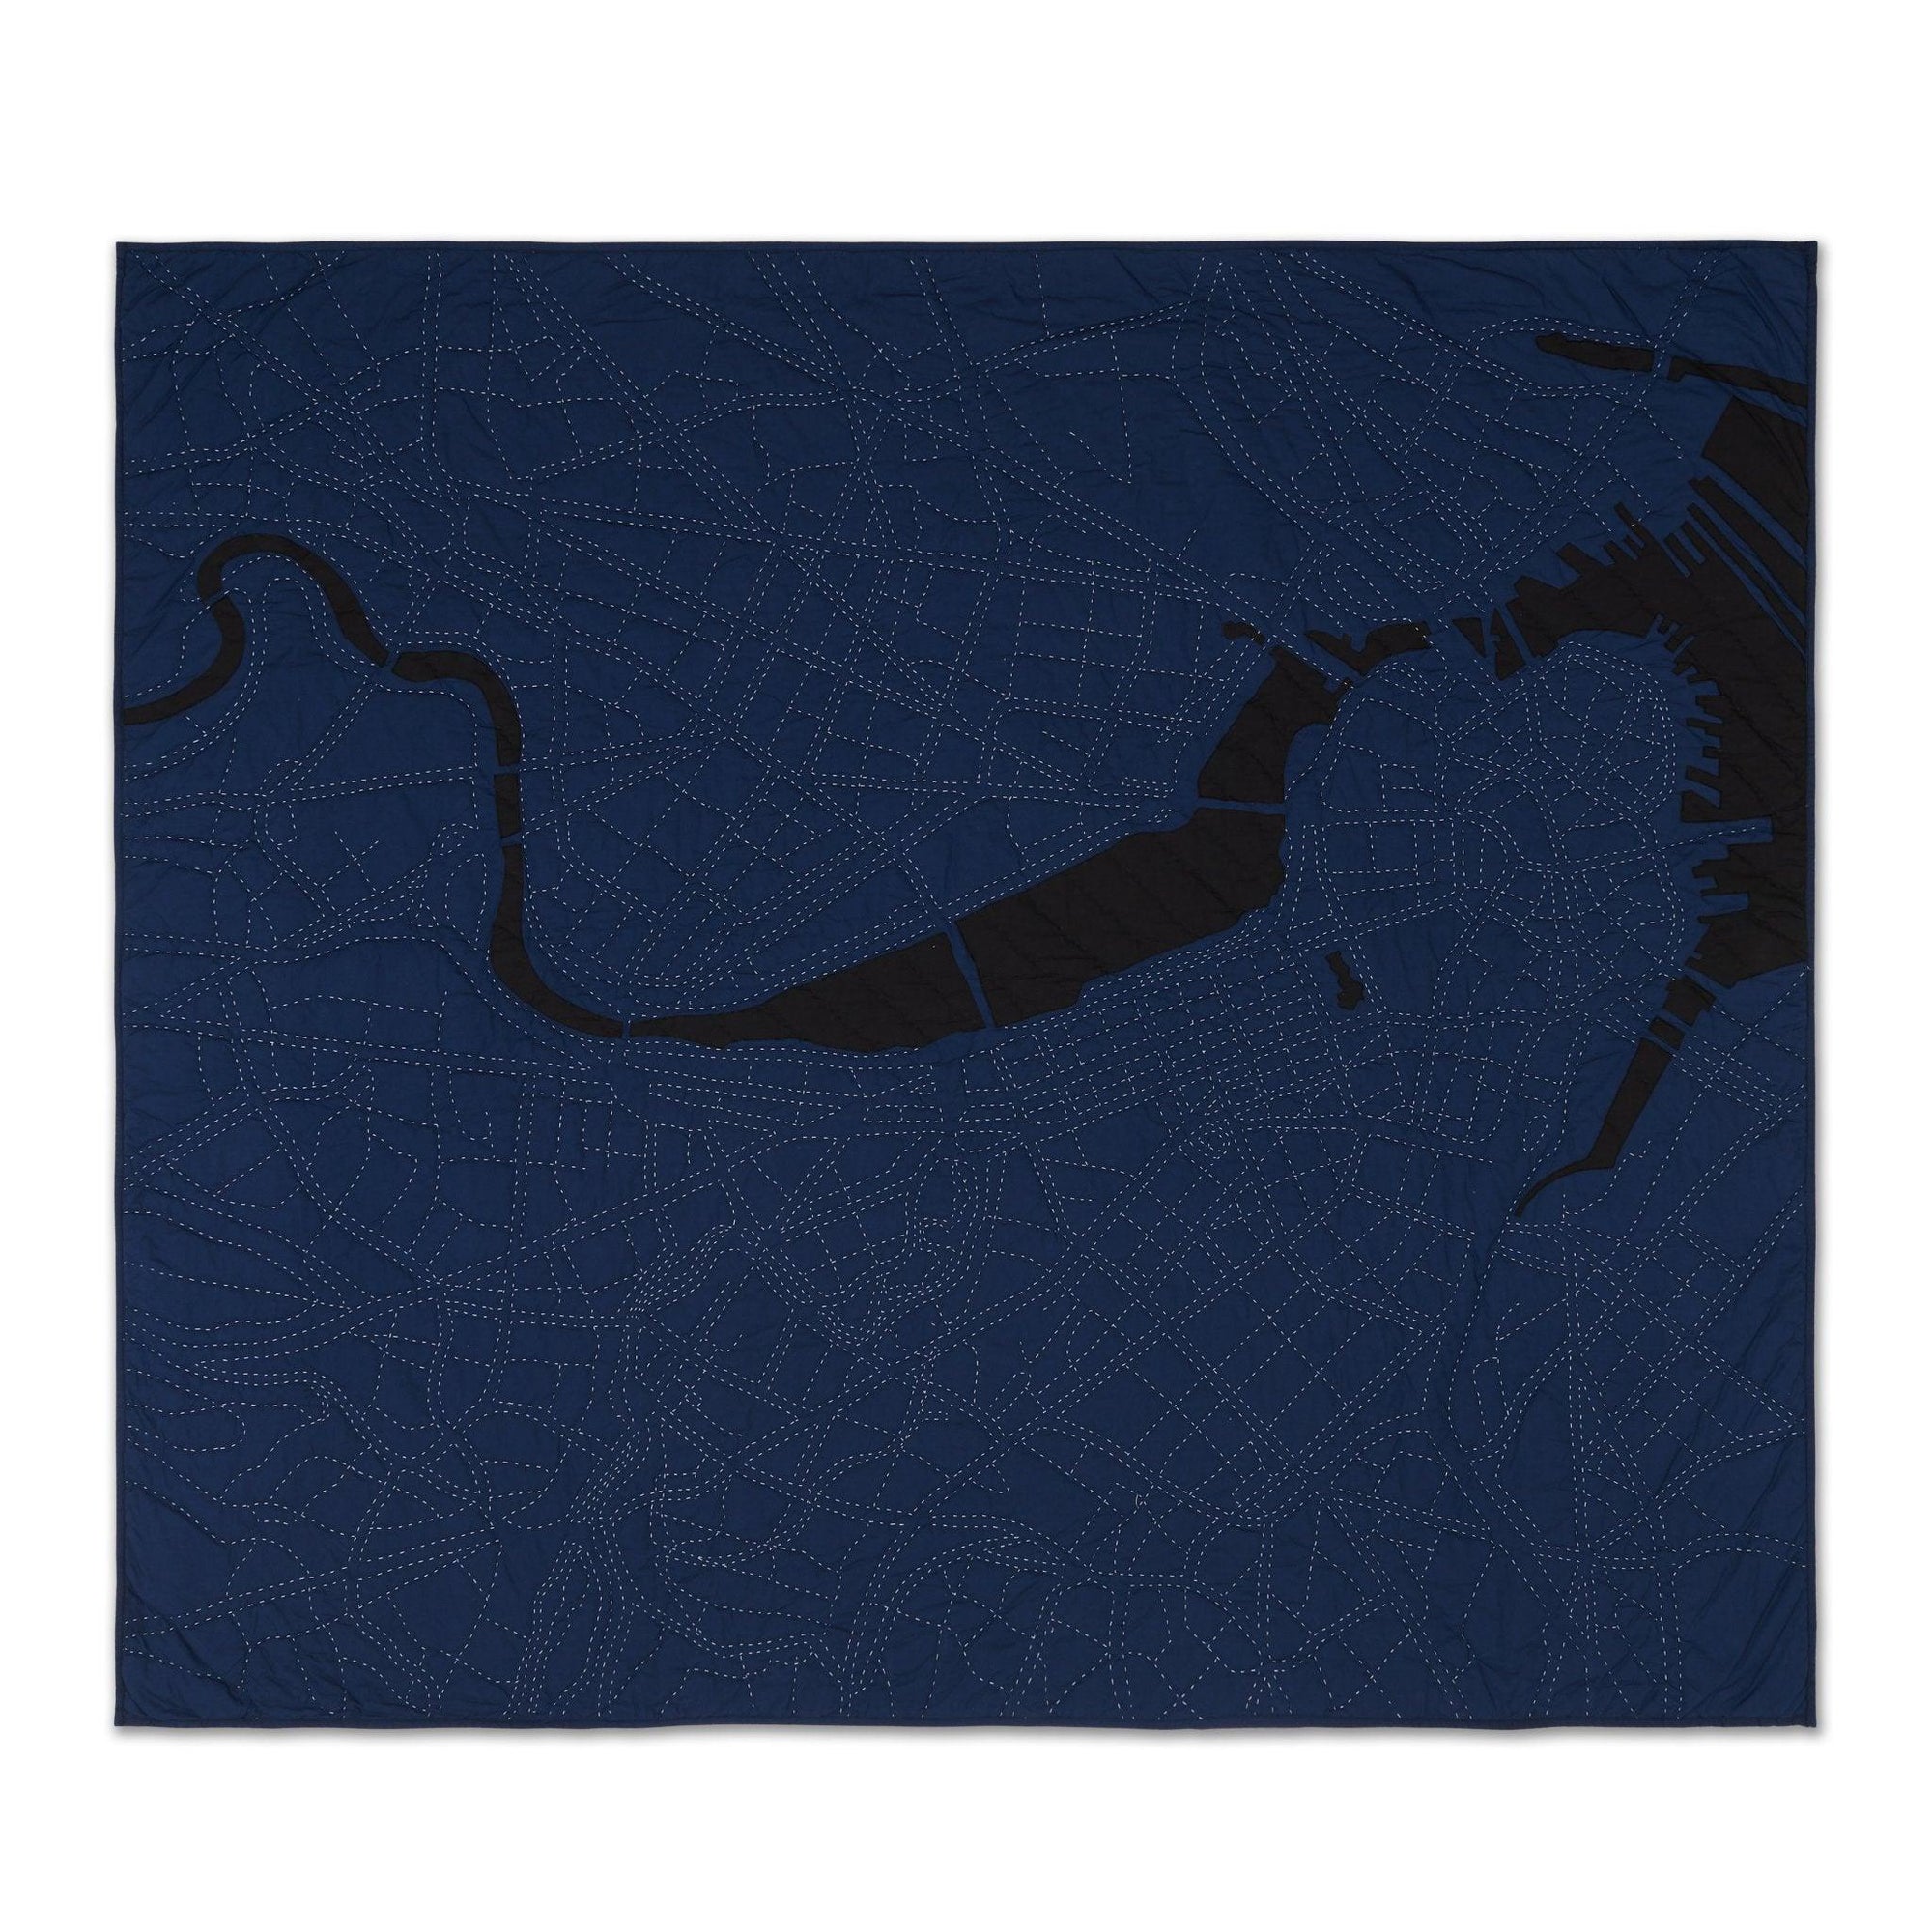 Hand-stitched quilt map of Boston by Haptic Lab with dark blue land and thread tracing city streets.